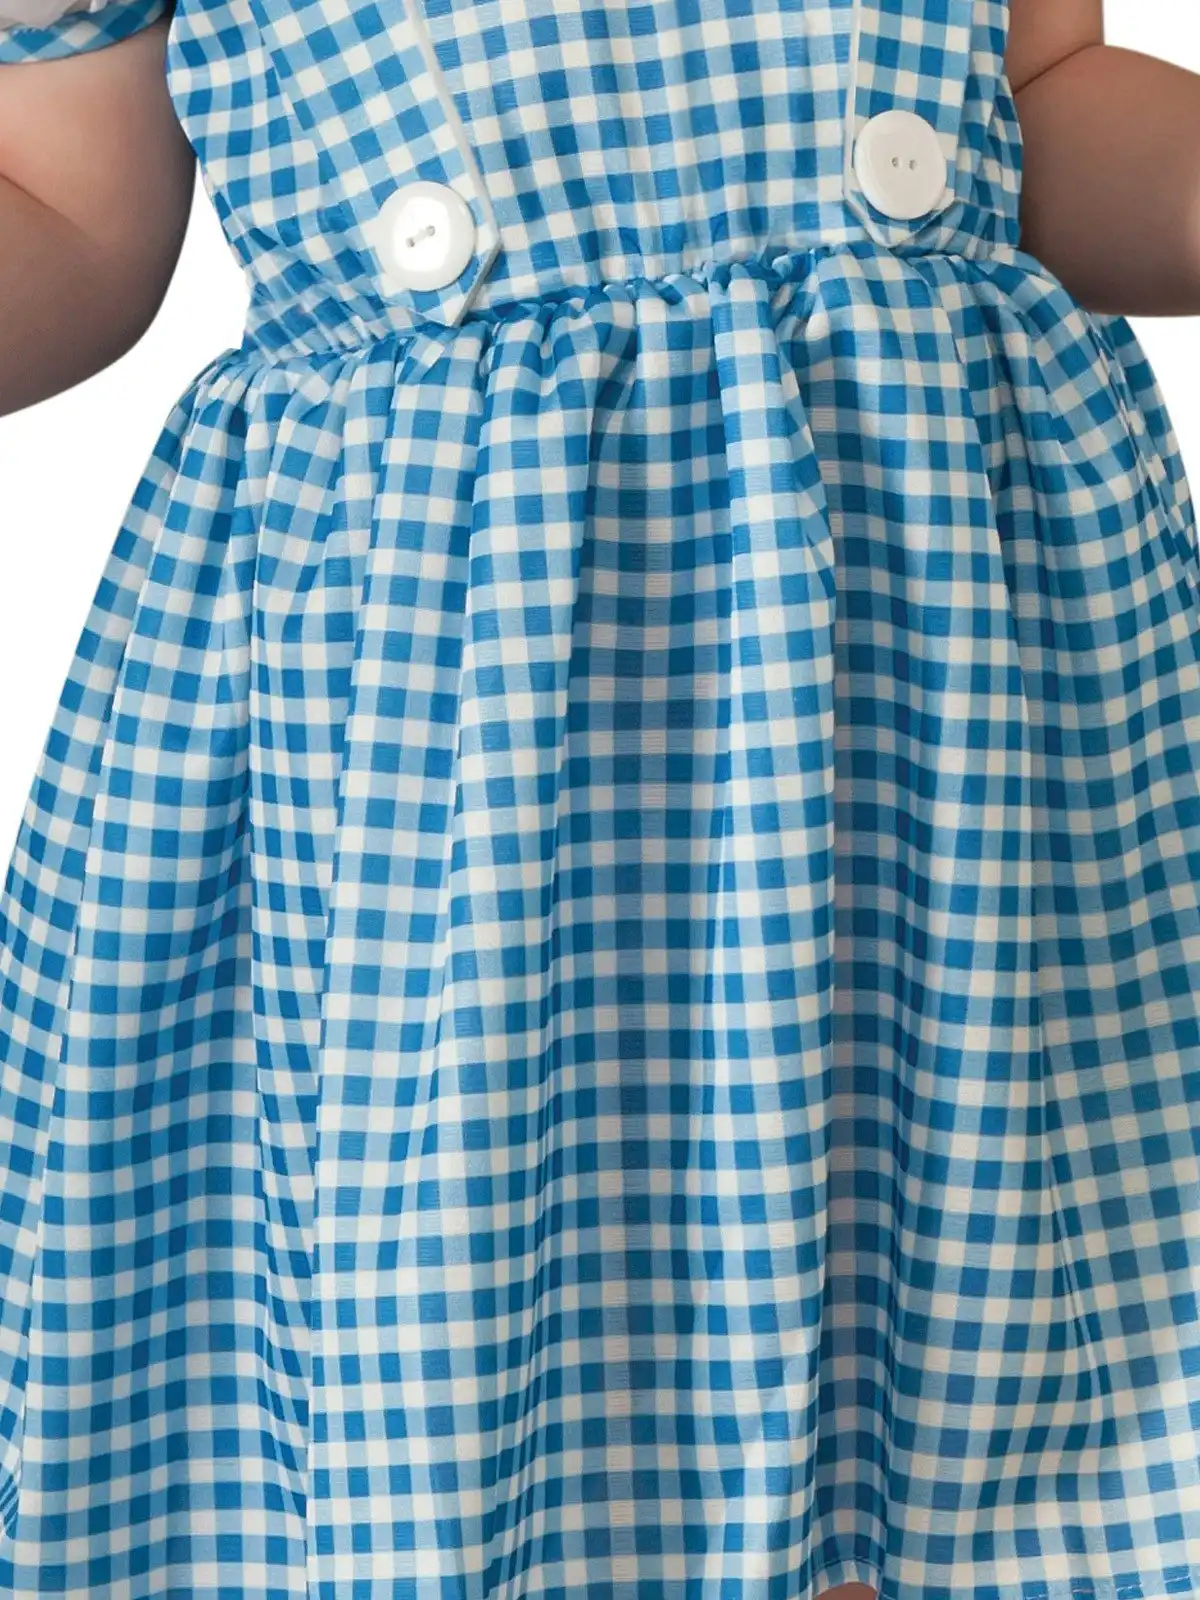 Wizard Of Oz Dorothy Dress Up/Character Party Costume - Size Baby Toddler